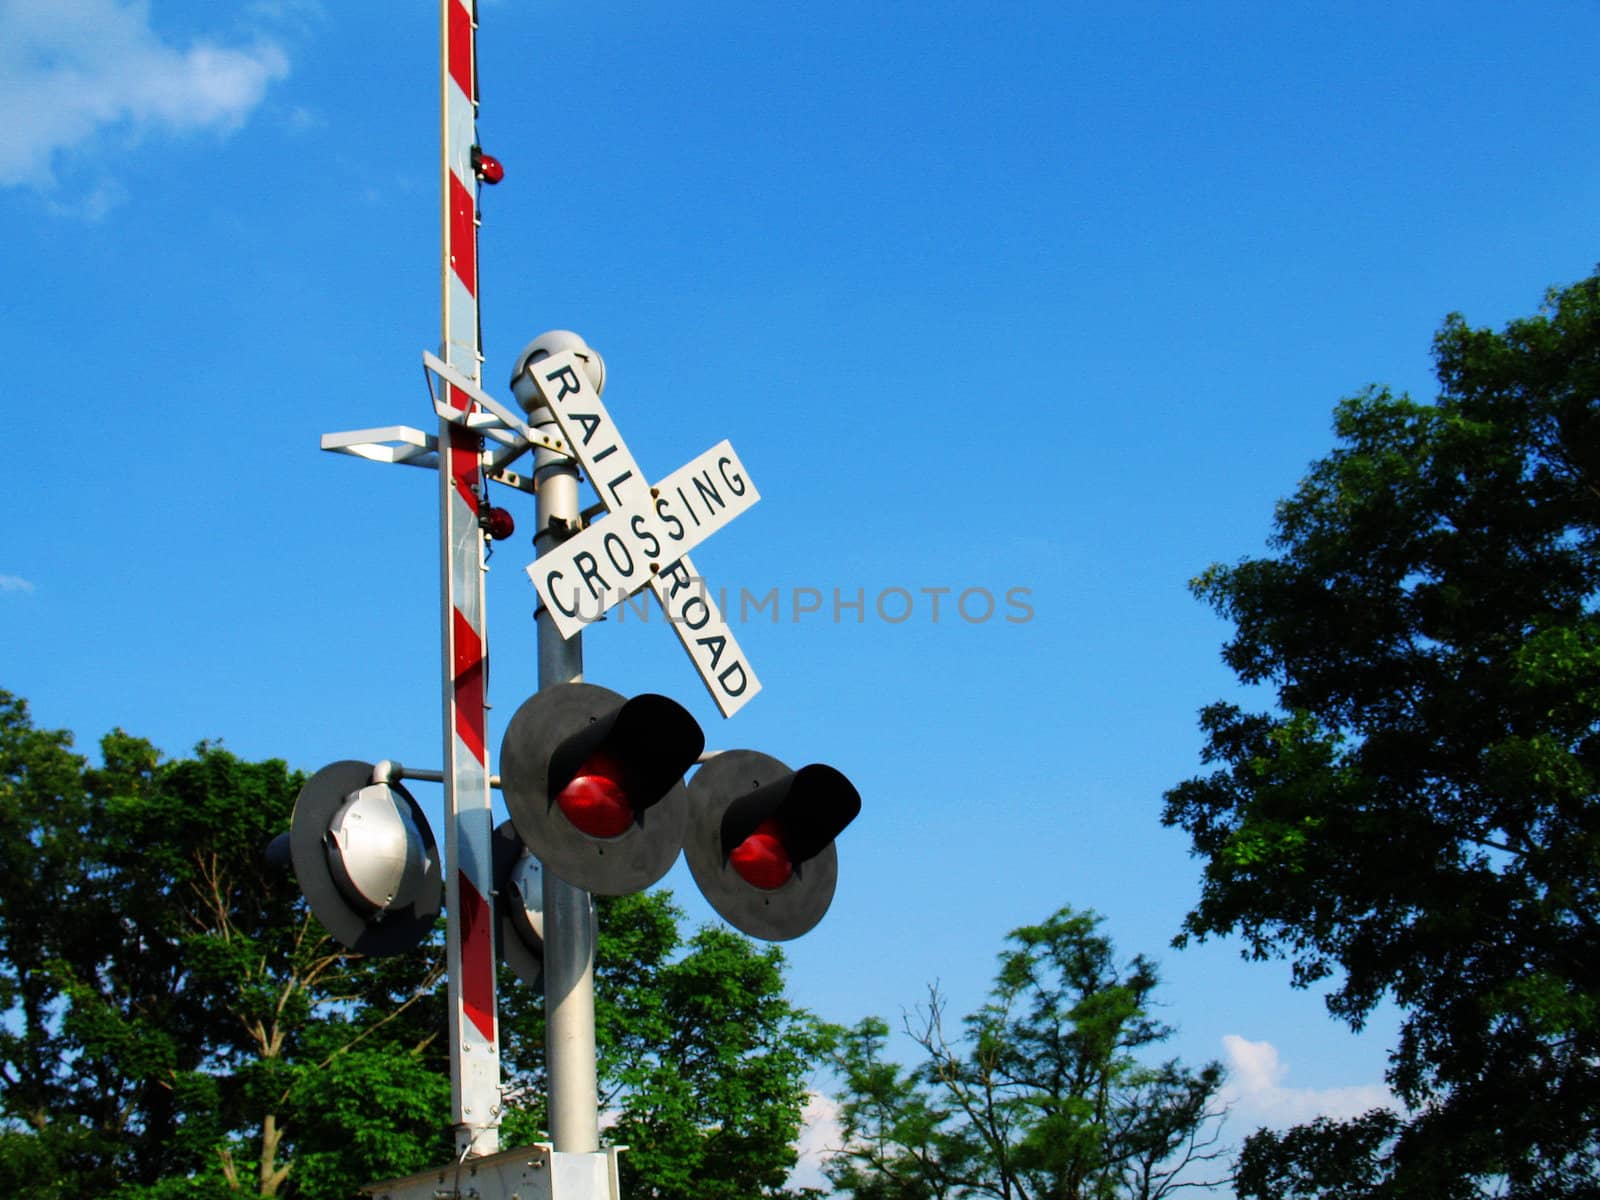 RR Crossing by sfisher16